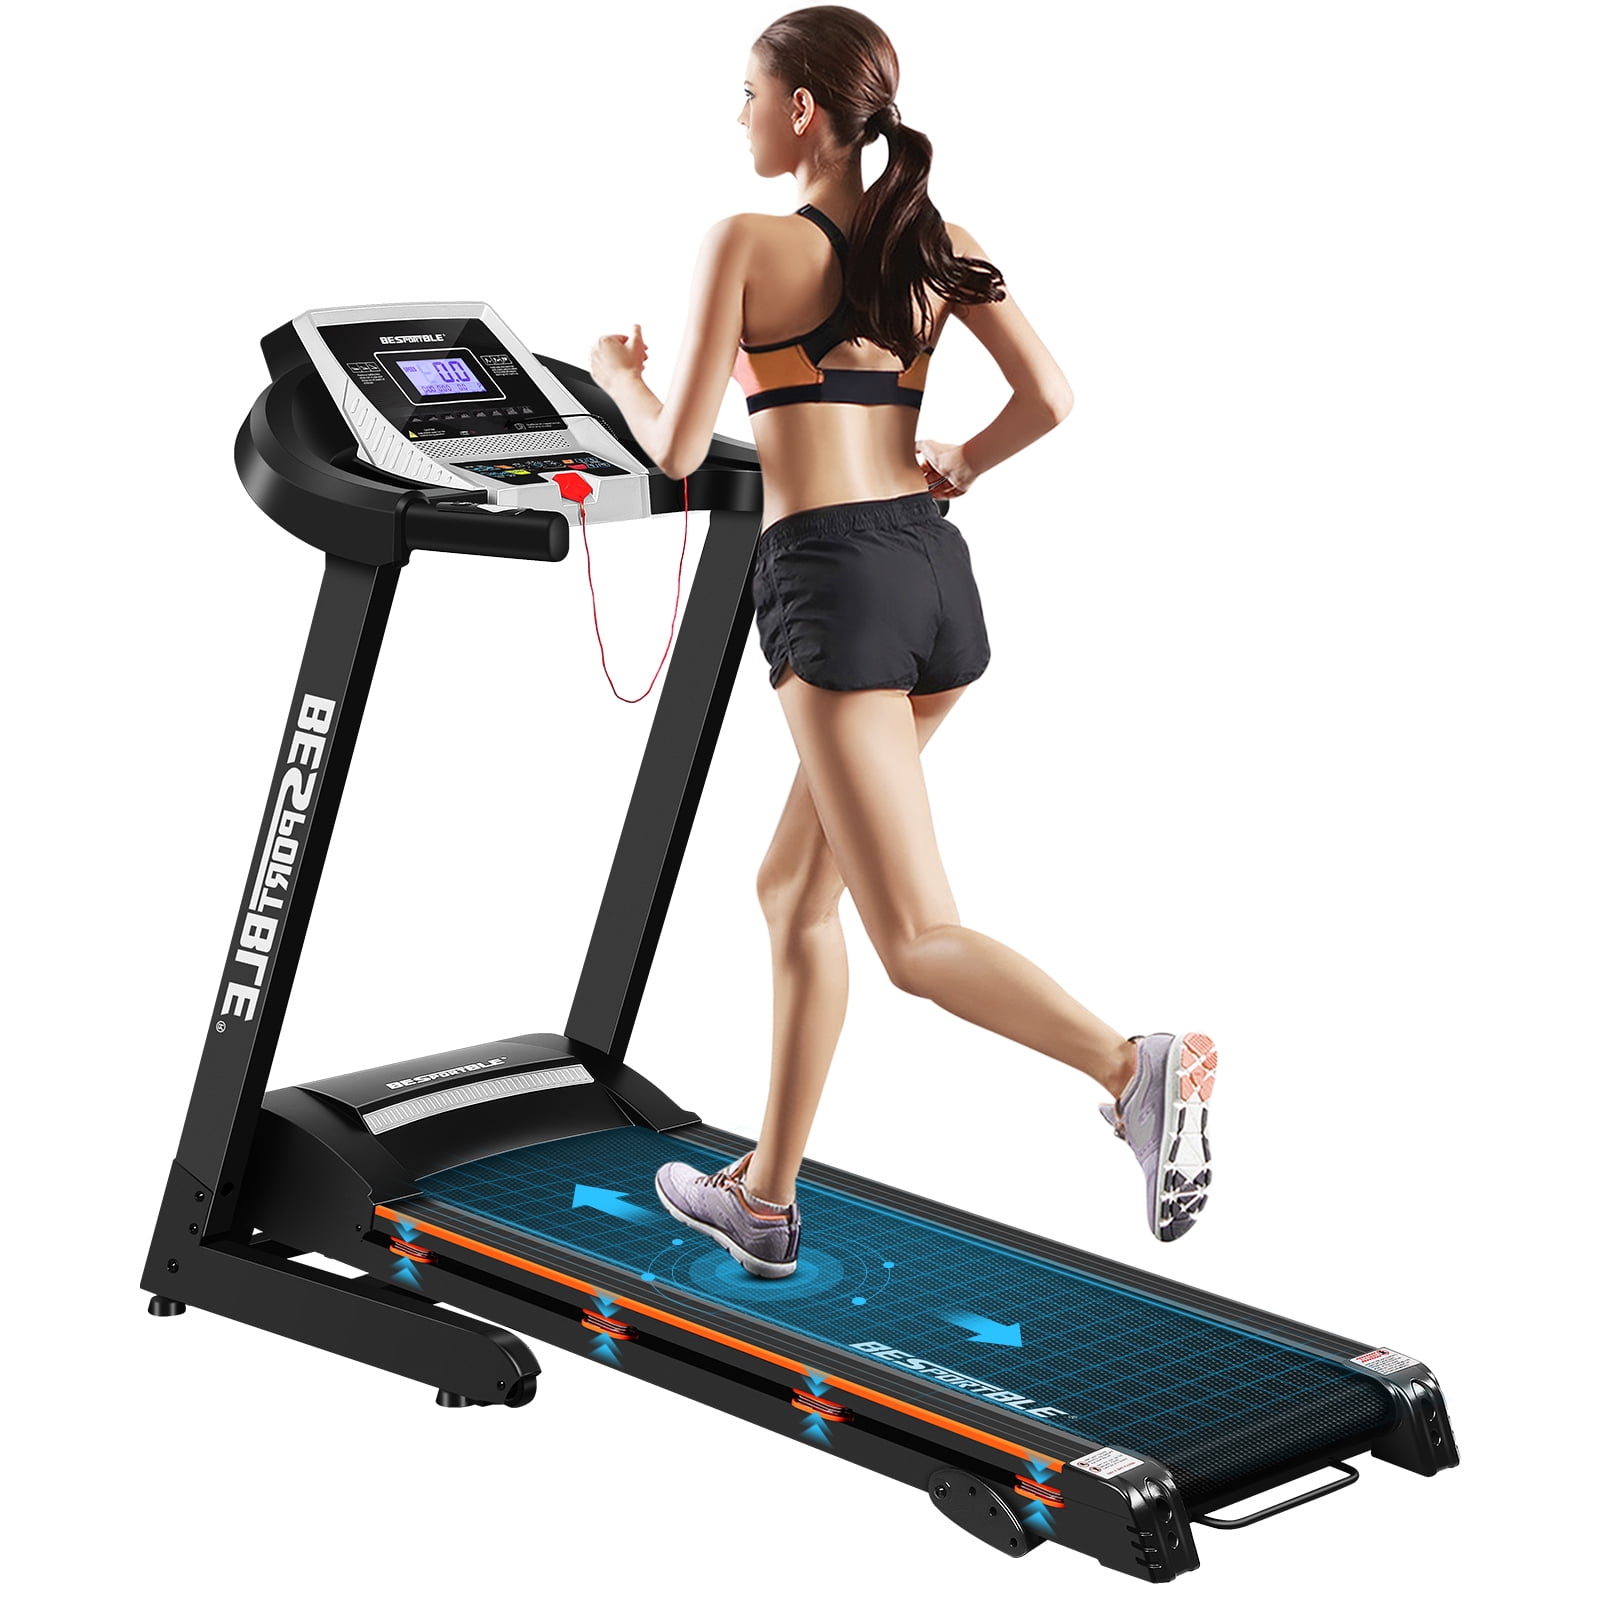 ANCHEER 3.25HP Electric Power Folding Treadmill Incline Space Saver Home Gym US 